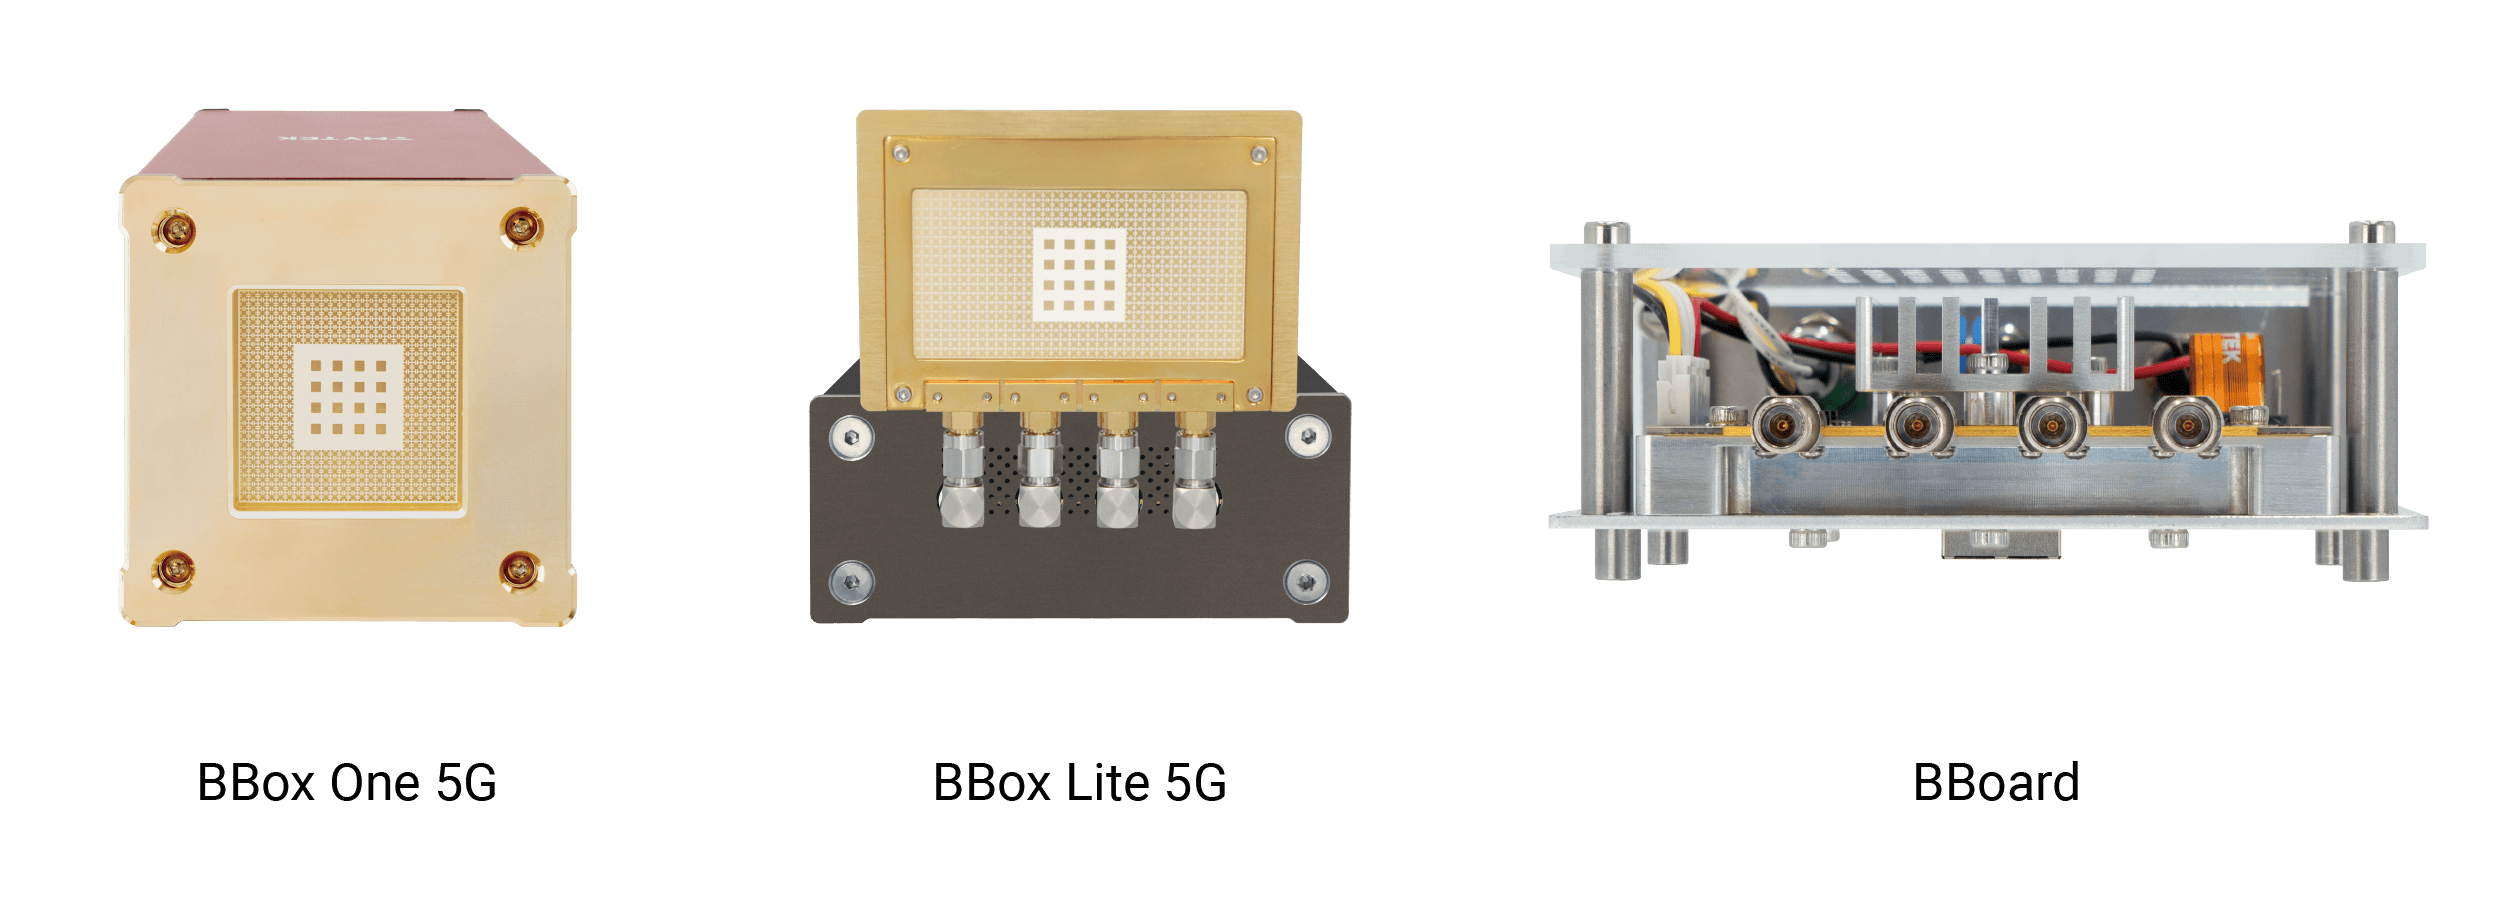 There are 3 types of beamforming devices available - BBox One 5G (4x4 RF channels), BBox Lite 5G (1x4 RF channels) and BBoard (5G/B5G beamforming educational kit).